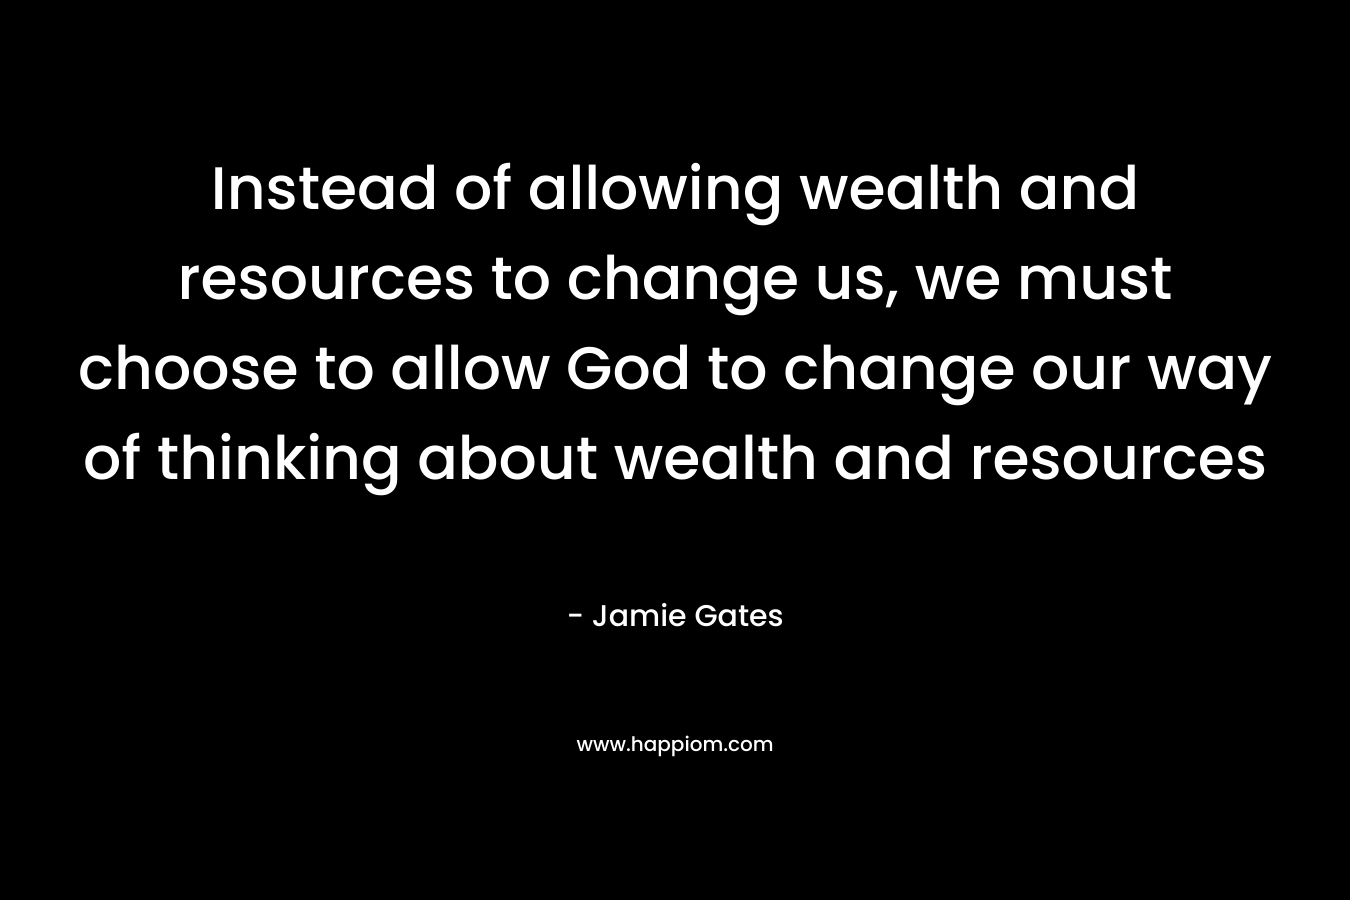 Instead of allowing wealth and resources to change us, we must choose to allow God to change our way of thinking about wealth and resources